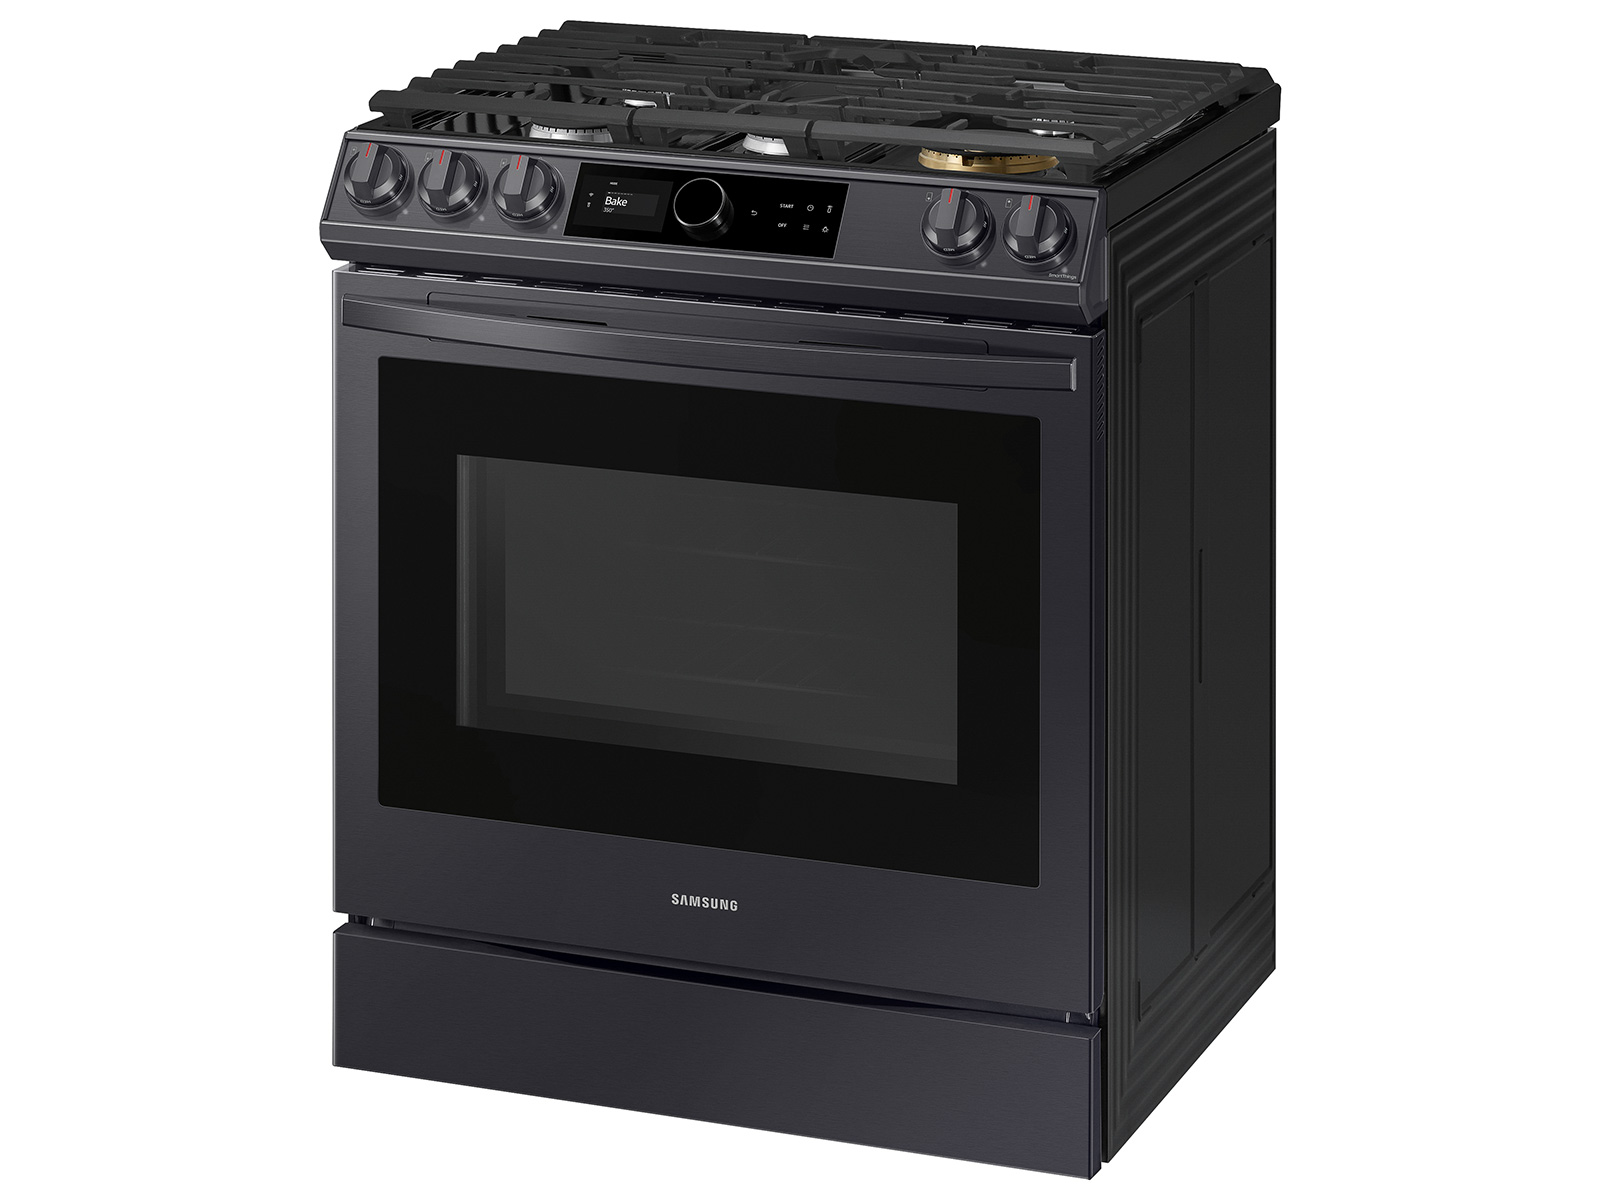 Thumbnail image of 6.0 cu ft. Smart Slide-in Gas Range with Smart Dial & Air Fry in Black Stainless Steel